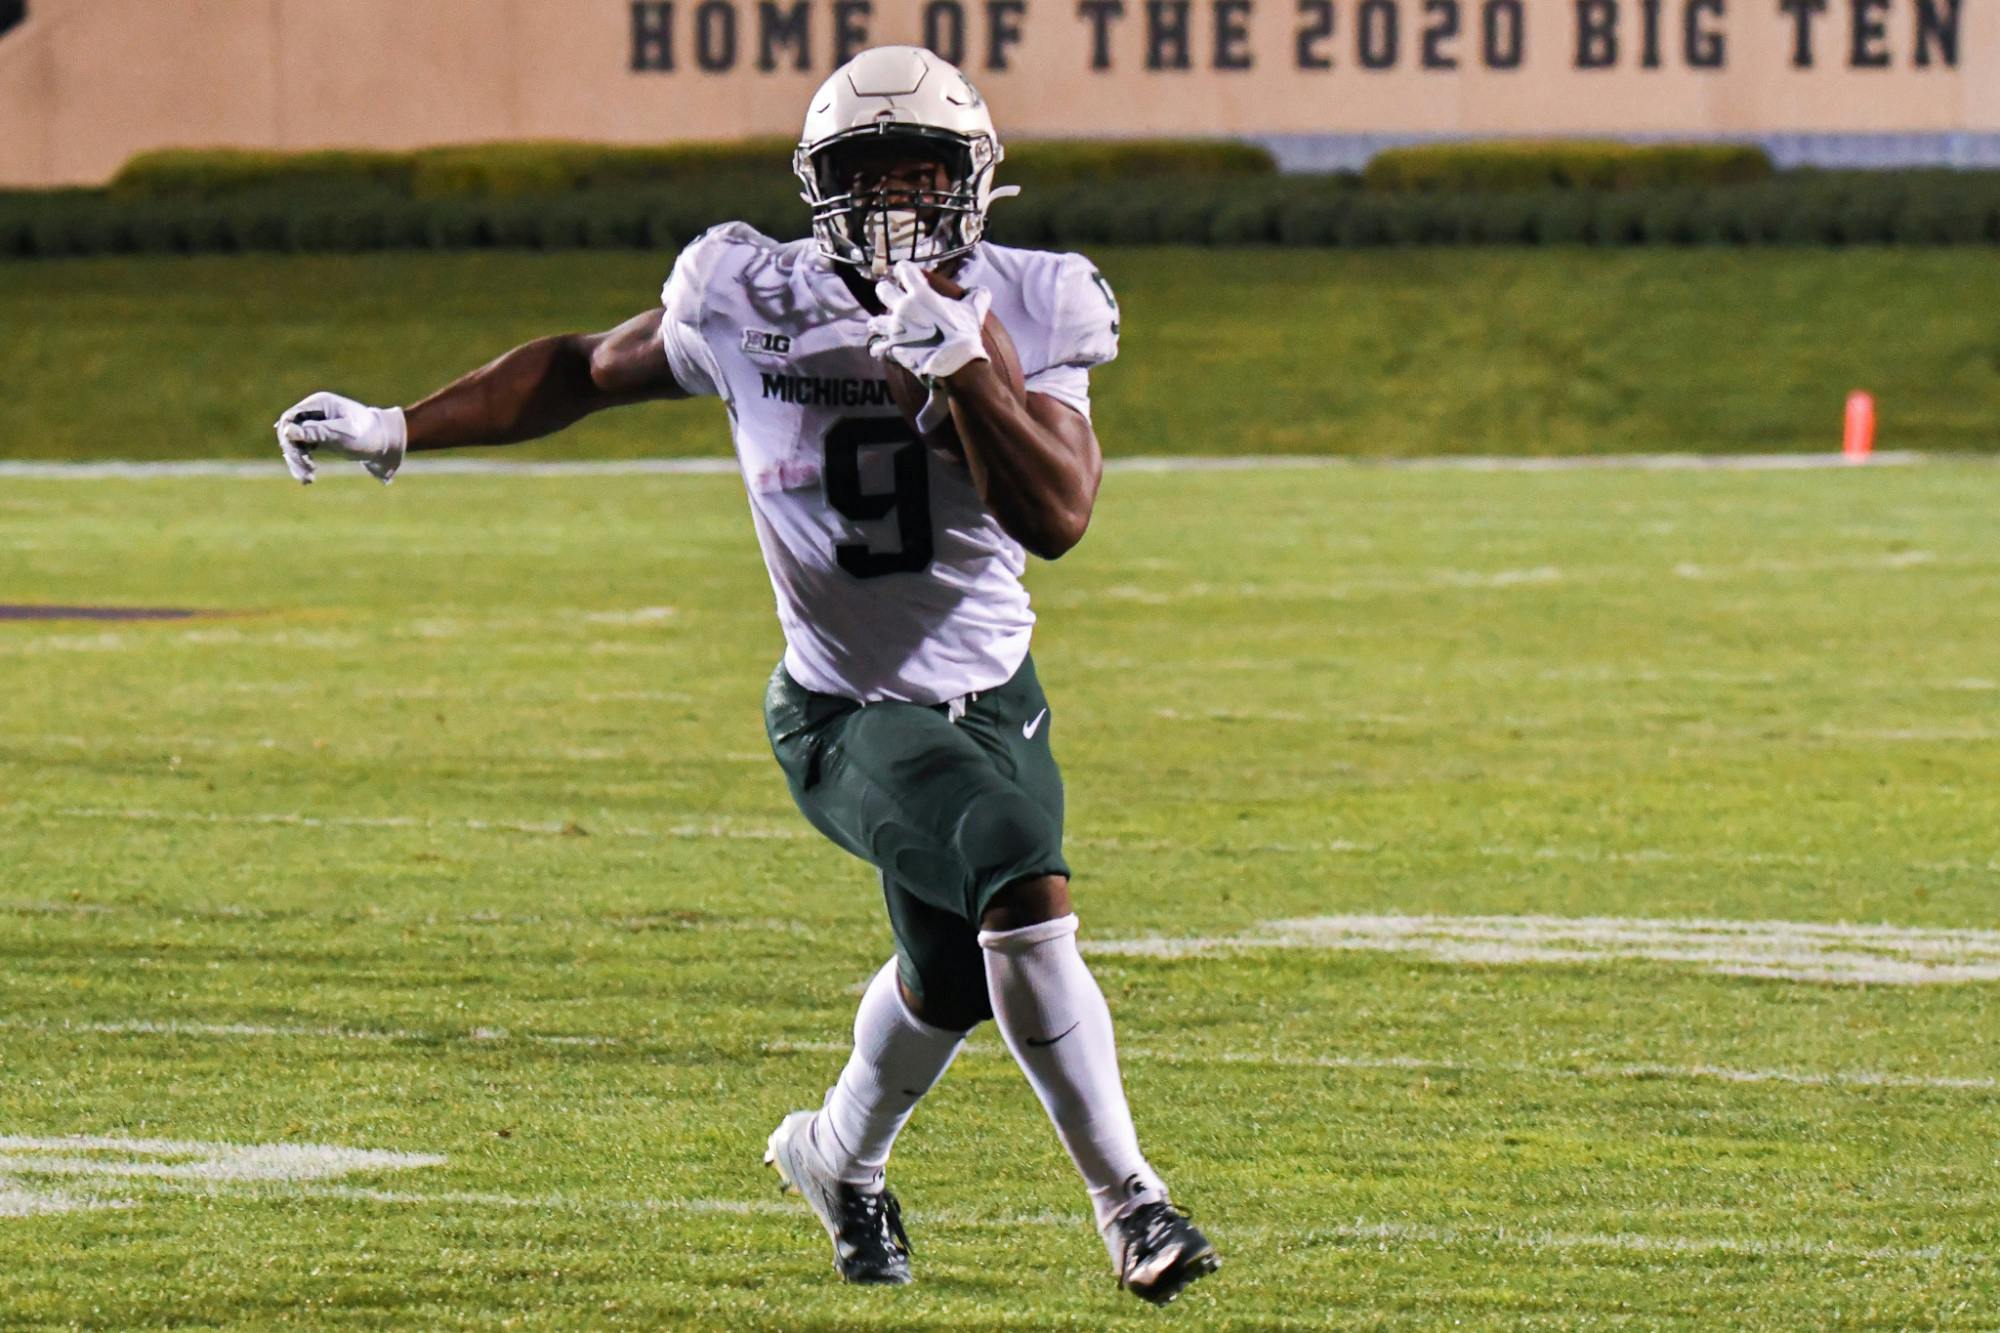 Junior running back Kenneth Walker III finds the open field during the Spartans game against Northwestern on Friday, Sep. 3.